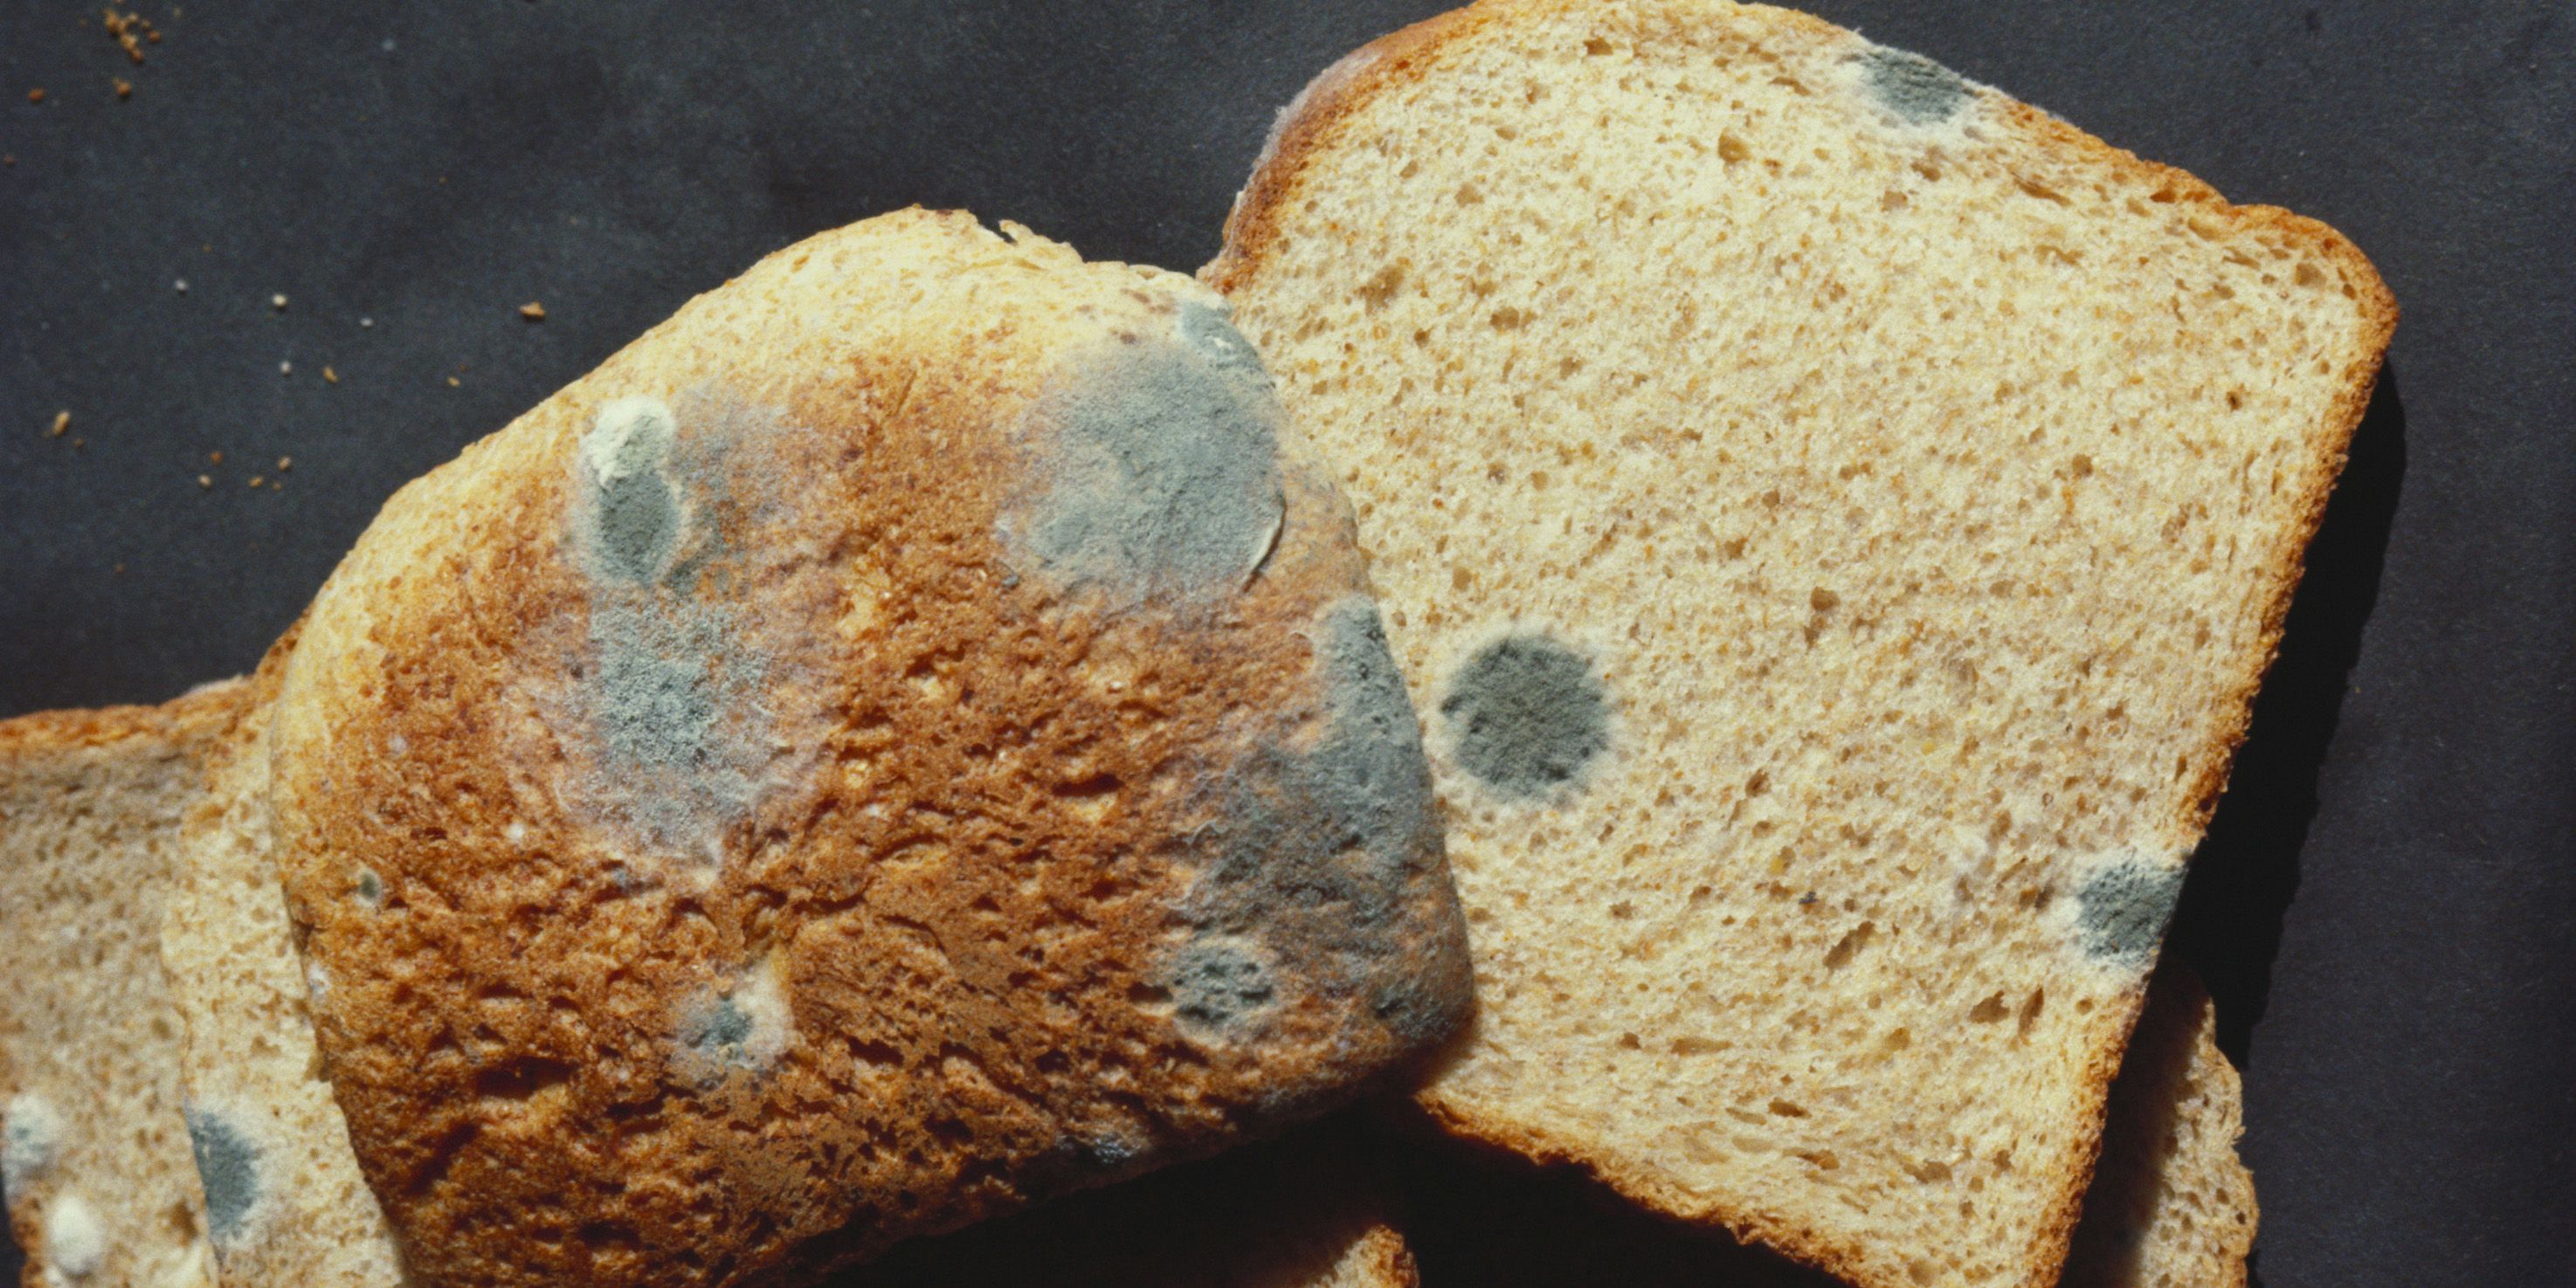 Why Picking Mold Off Bread And Eating The Rest Is Unsafe - Moldy Bread  Safety